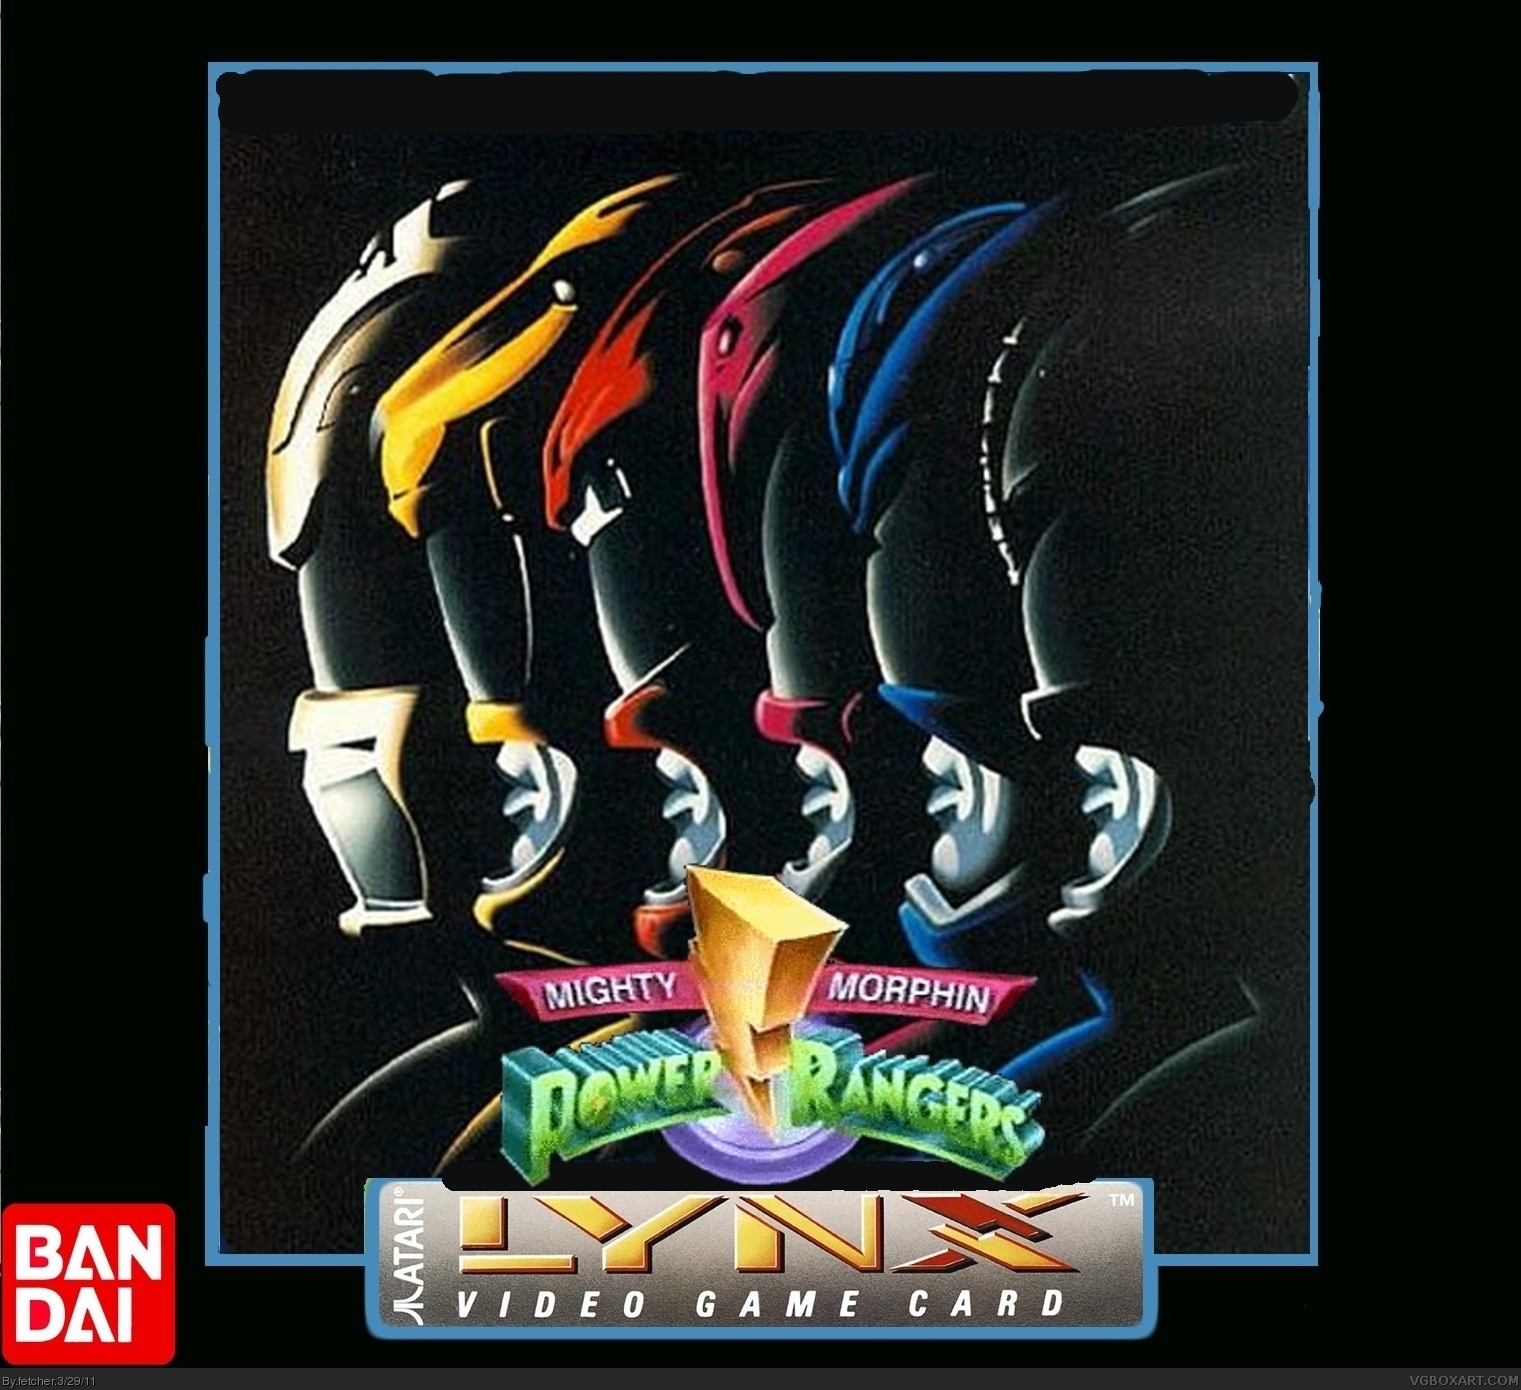 Mighty Morphin Power Rangers box cover